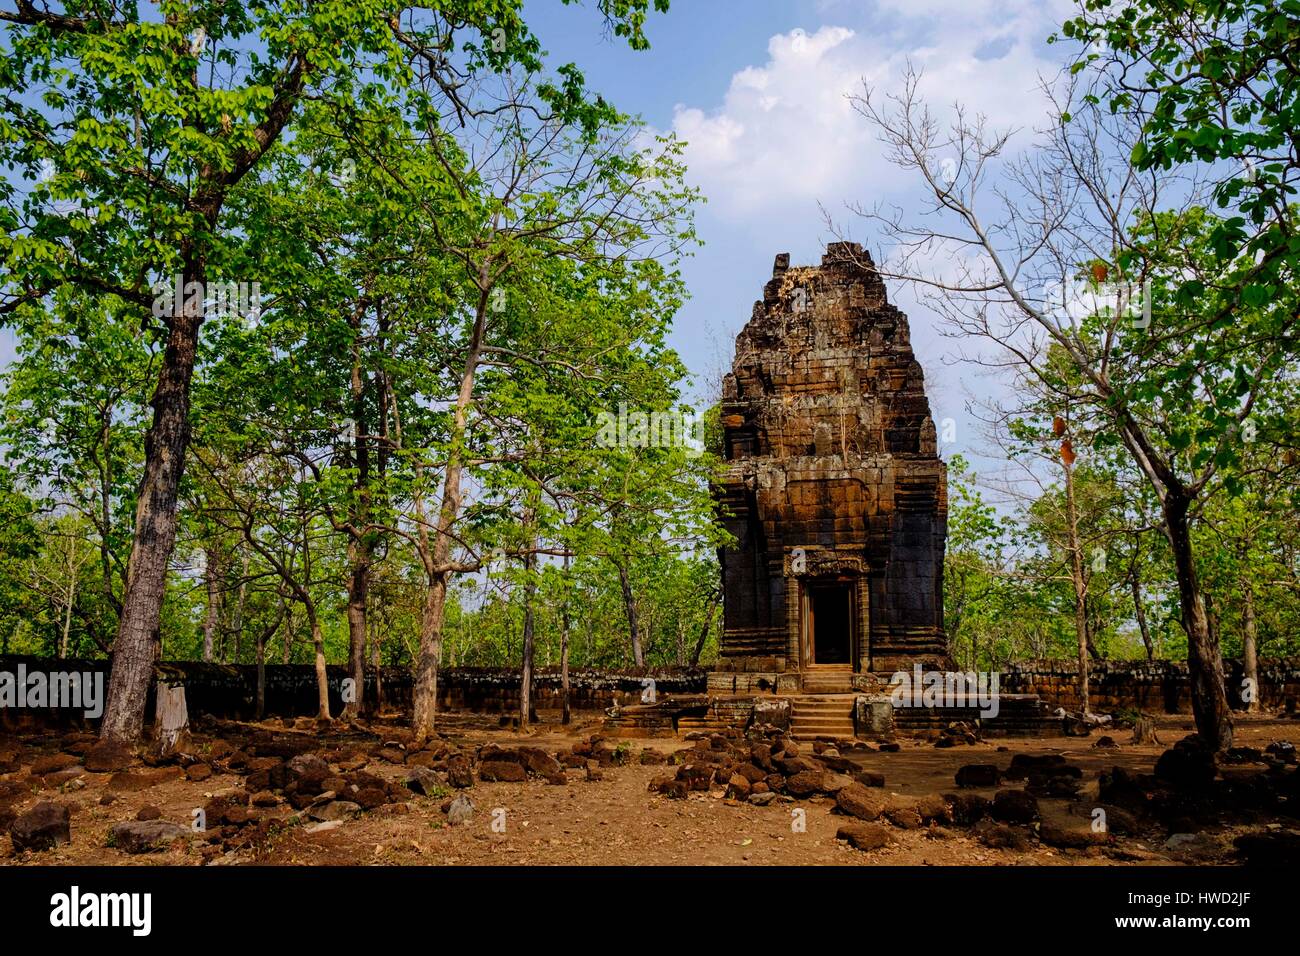 Cambodia, Preah Vihear province, temples complex of Koh Ker, dated 9 to 12th century, temple of Prasat Neang Khmau Stock Photo